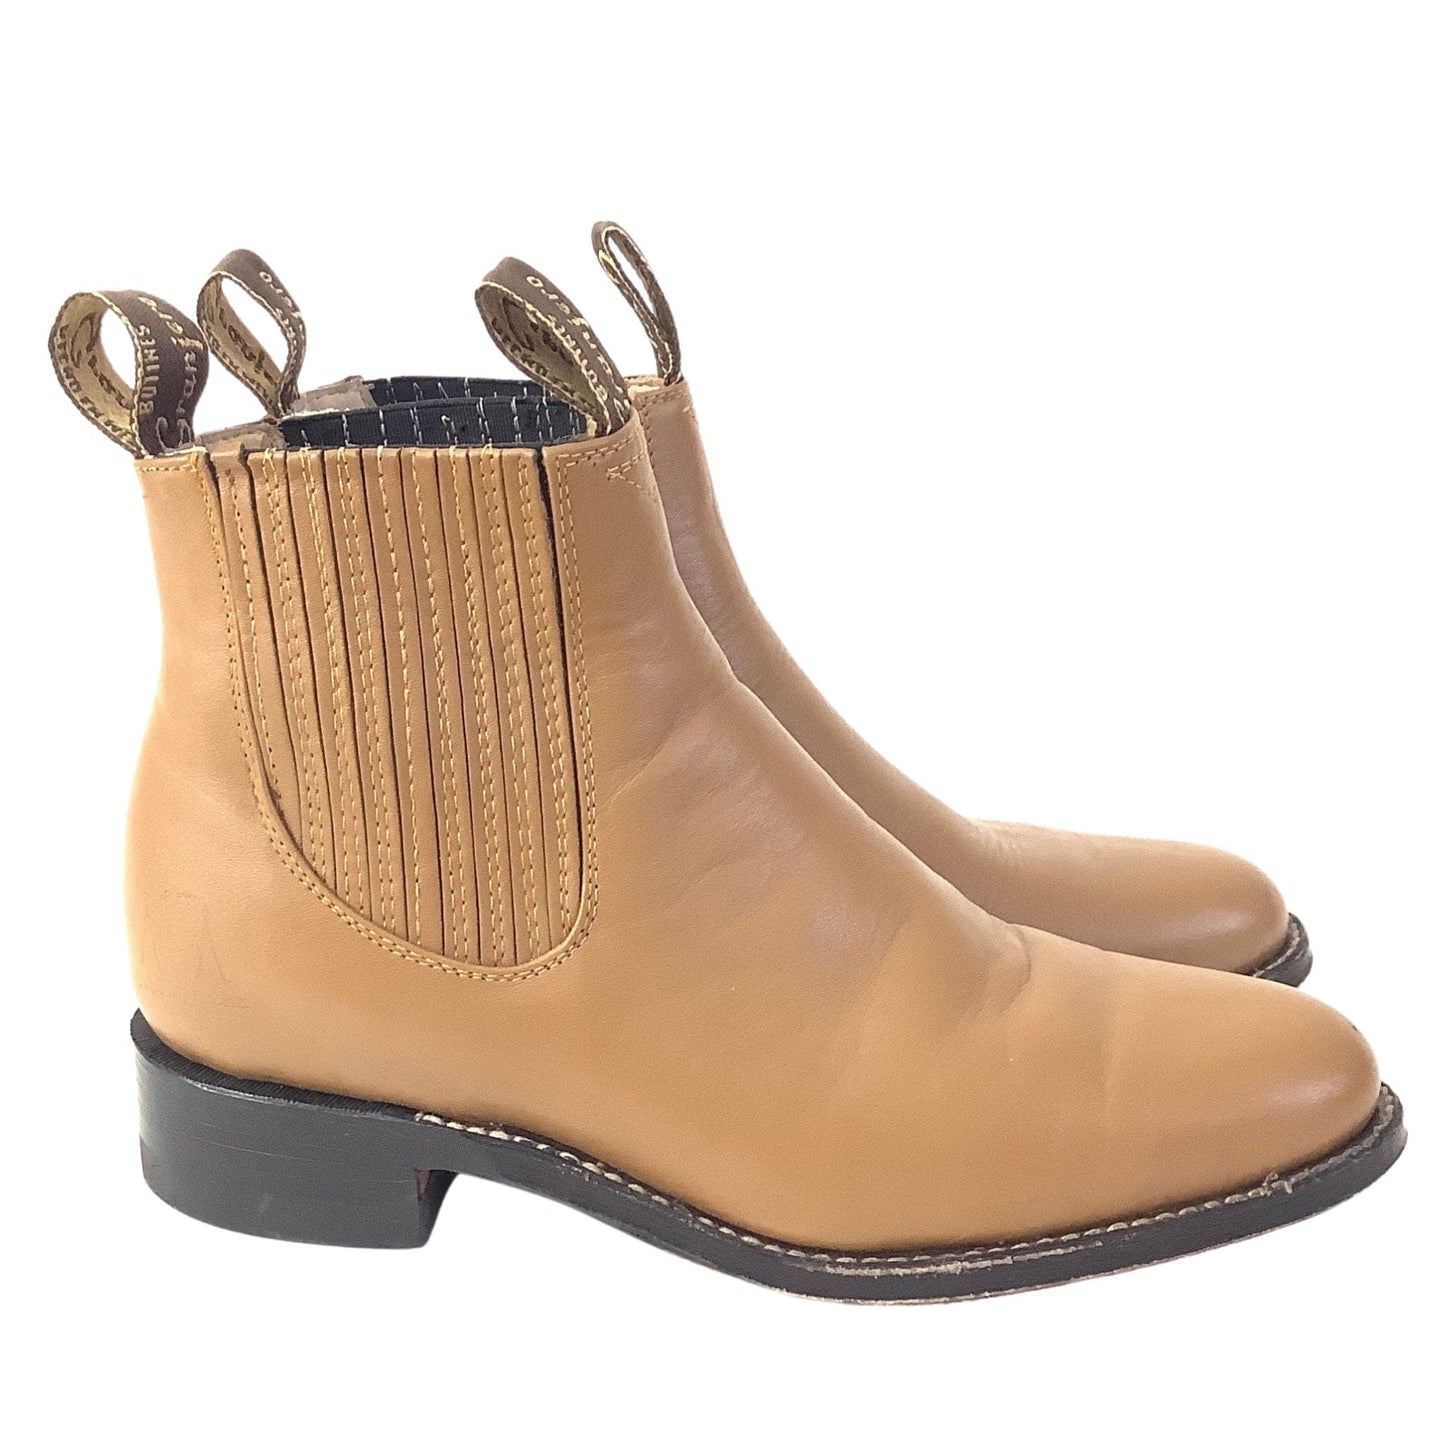 Y2K Leather Chelsea Boots 9 / Tan / Y2K - Now